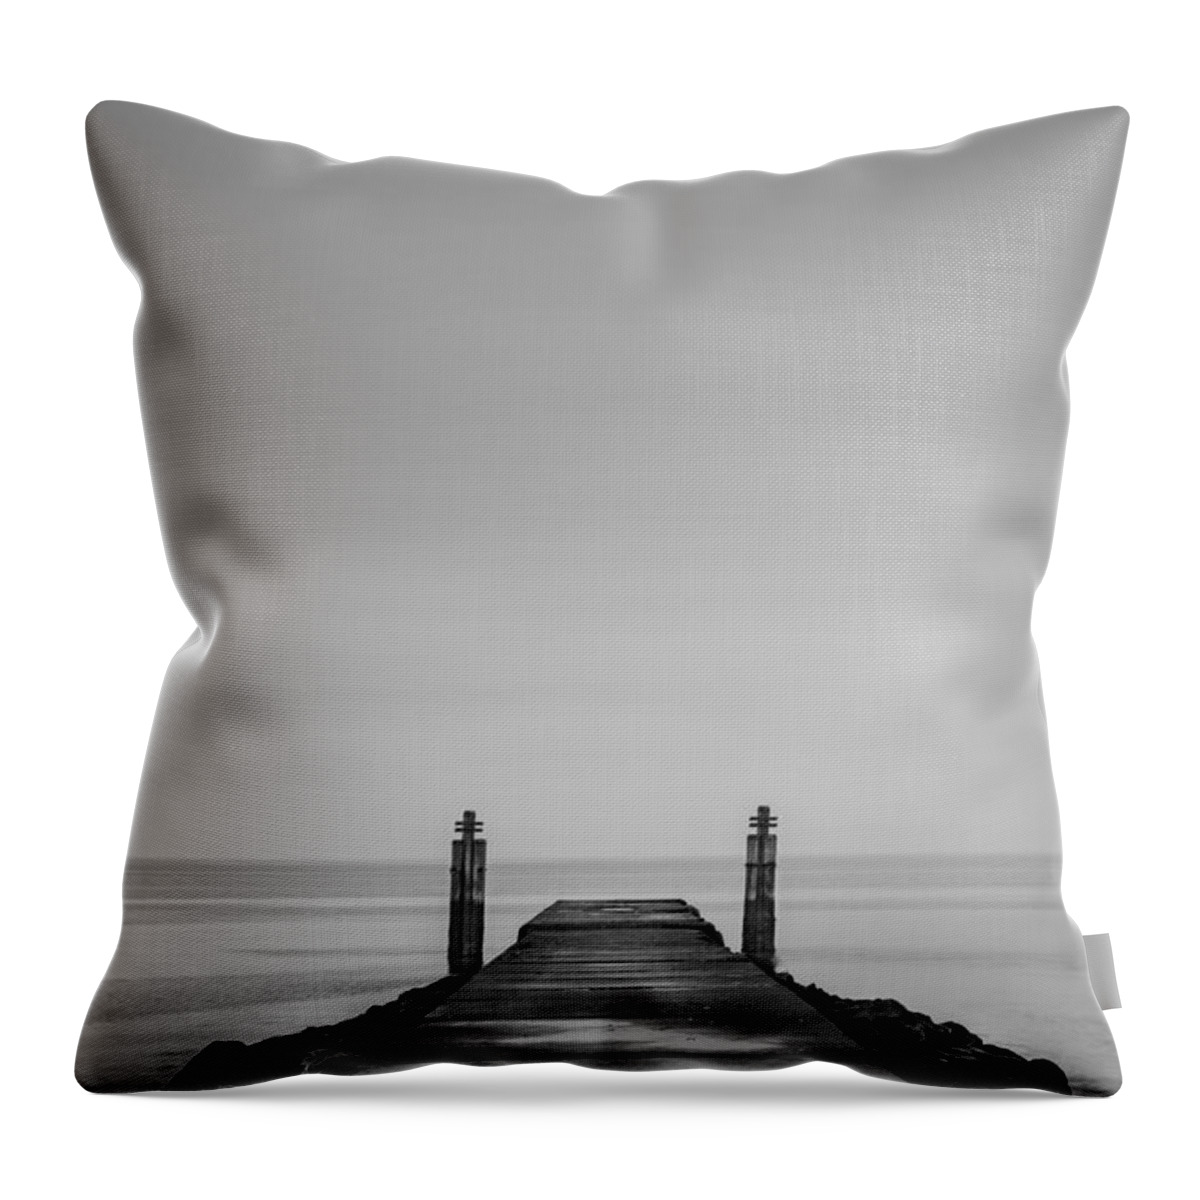 Pier Throw Pillow featuring the photograph One Step Closer by Evelina Kremsdorf